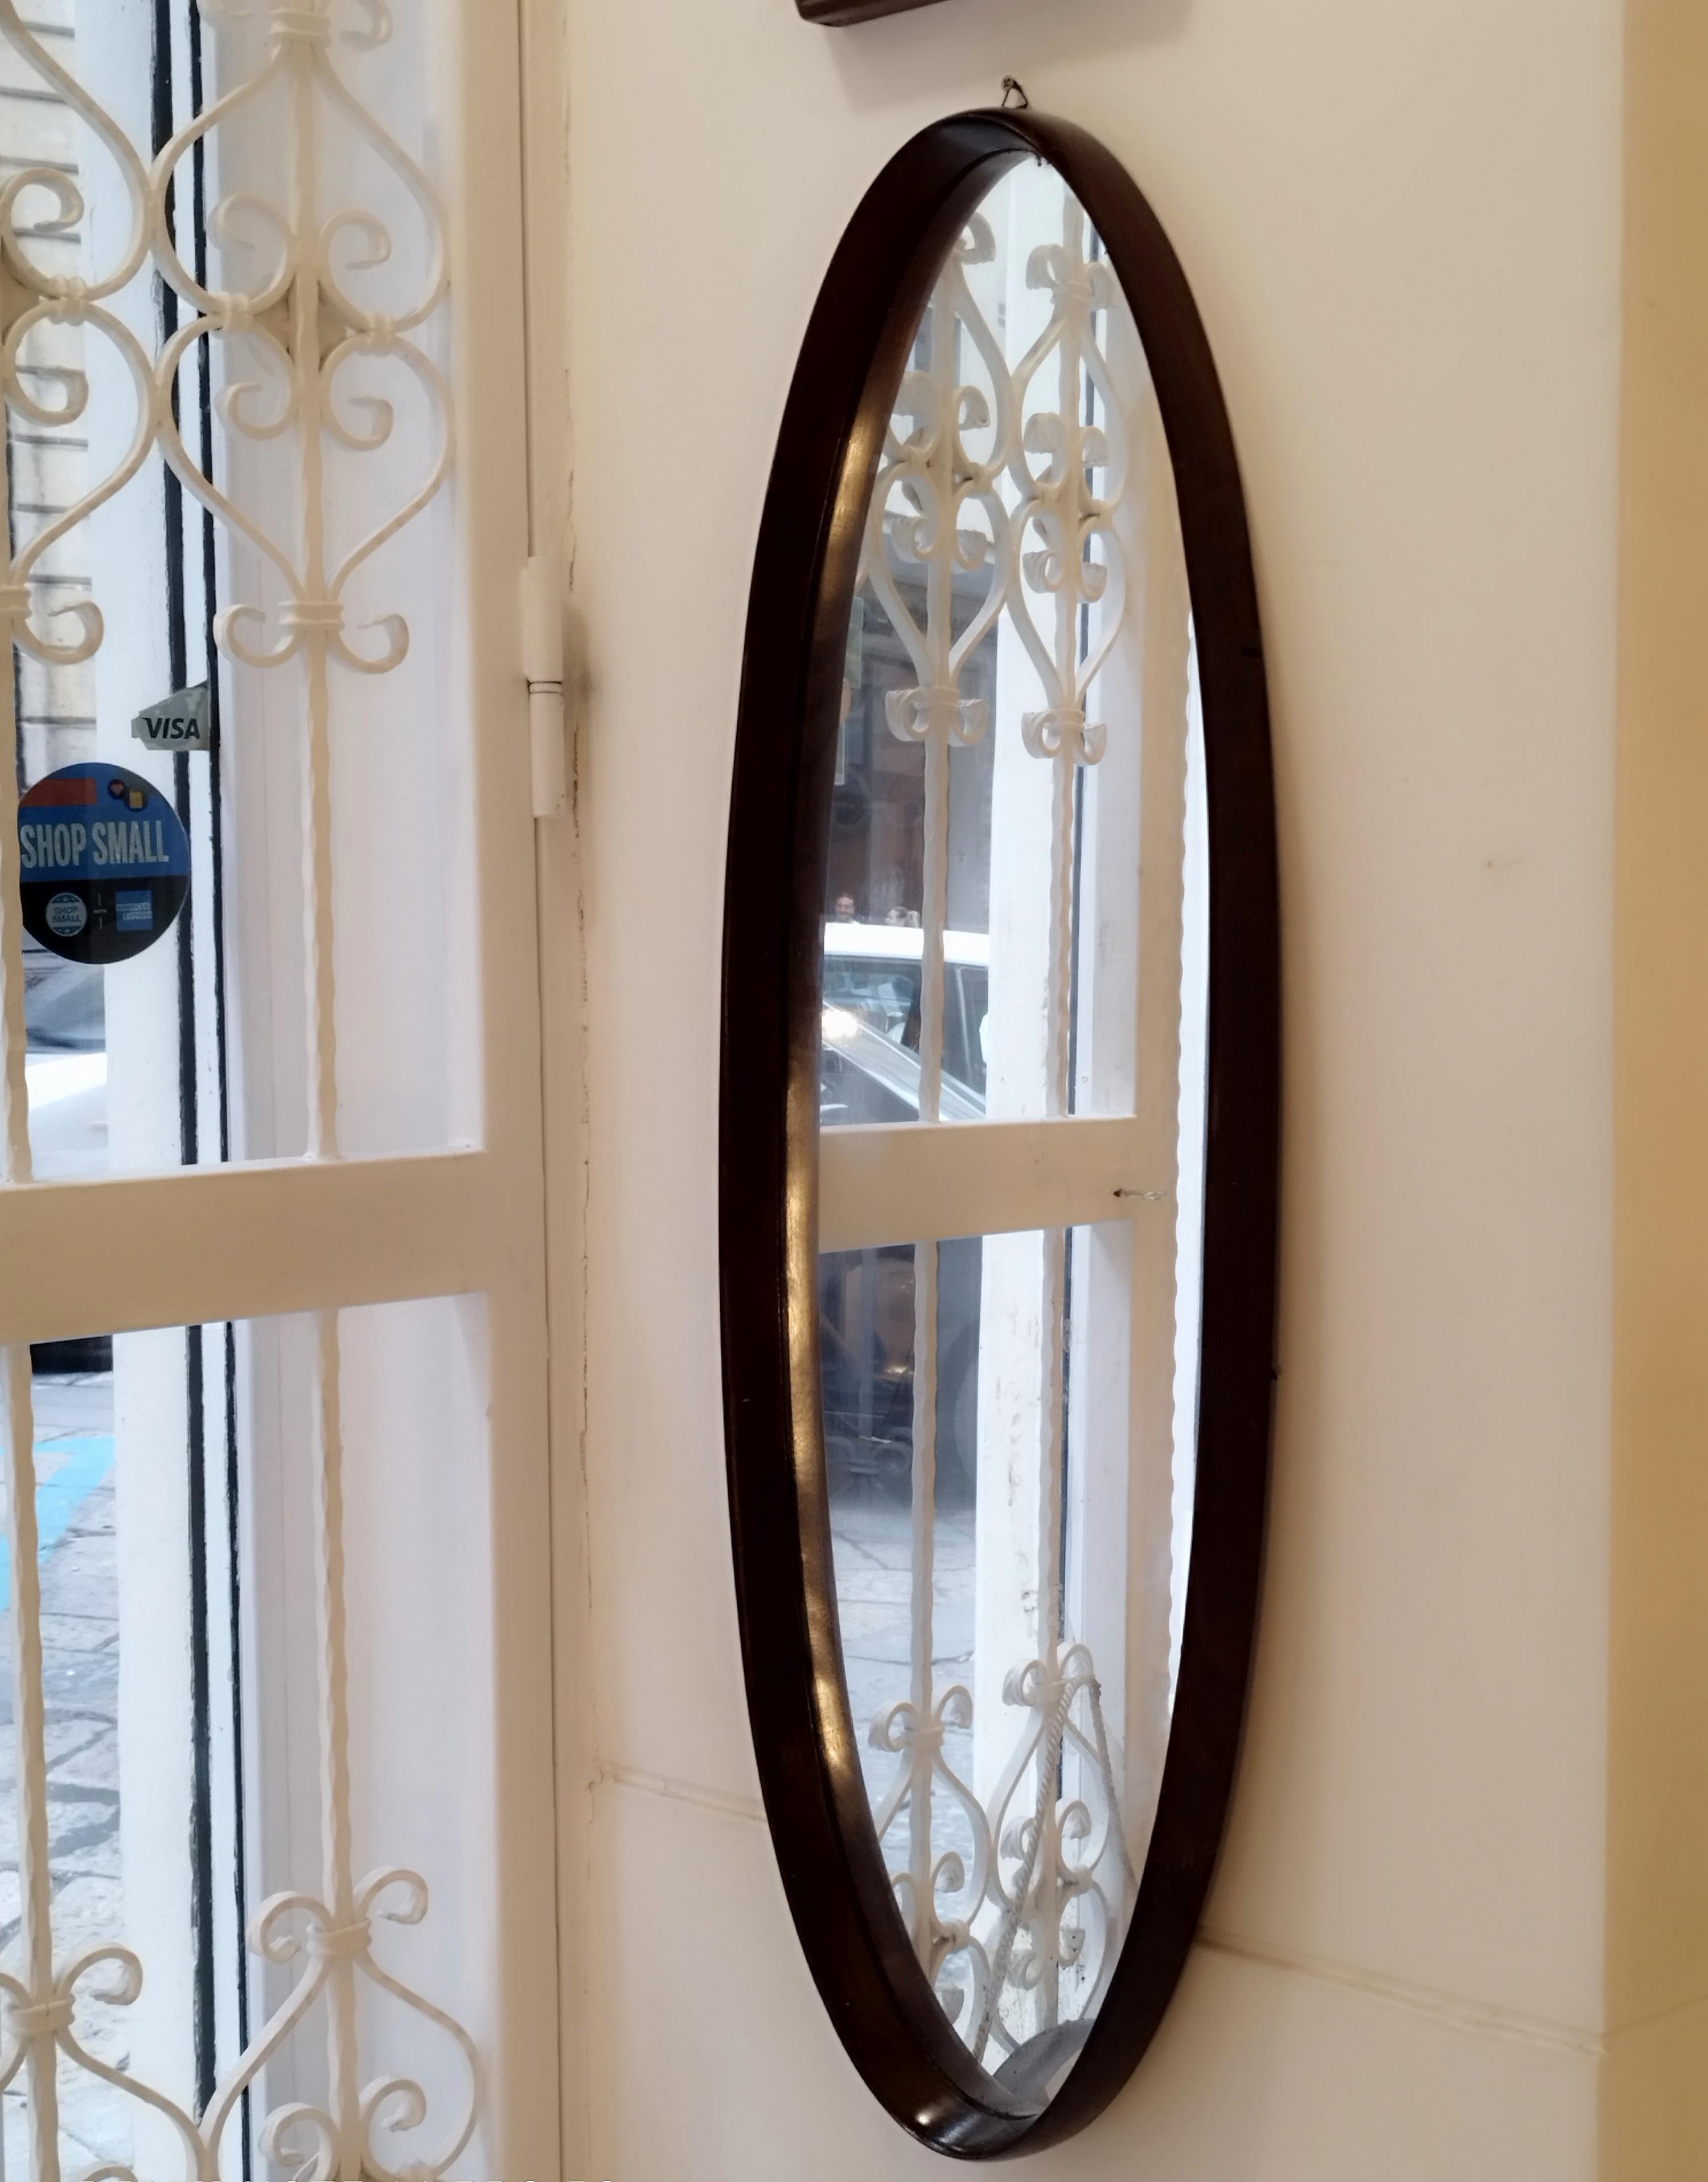 Large oval mirror with curved wooden frame, made in Italy in the 1960s. Wooden back panel.
Good overall condition, some marks due to normal use over time.